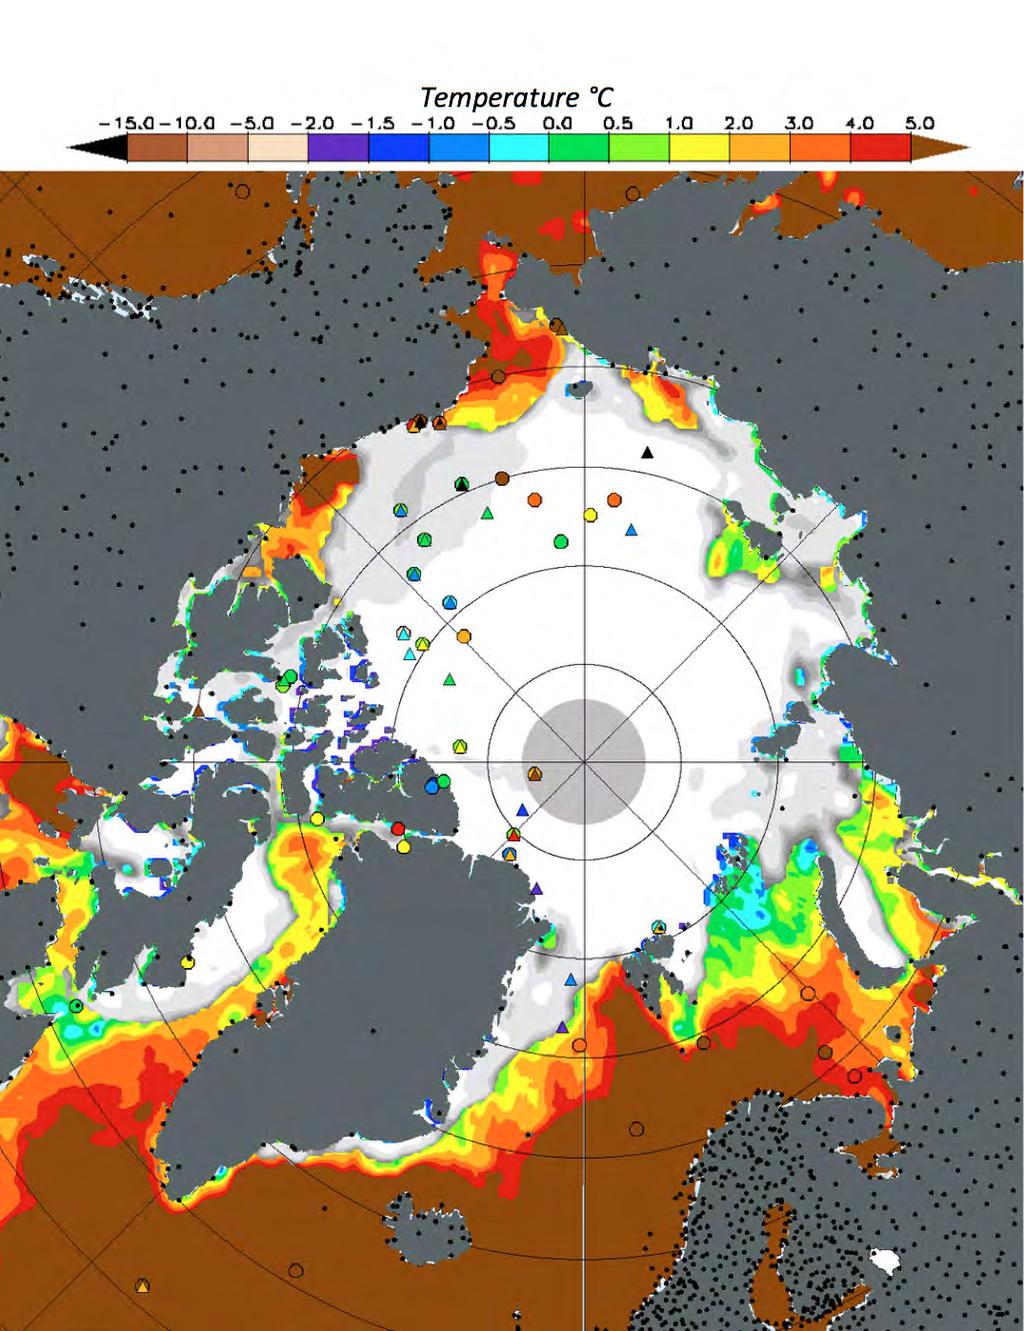 Scarcity of Arctic Observation Stations